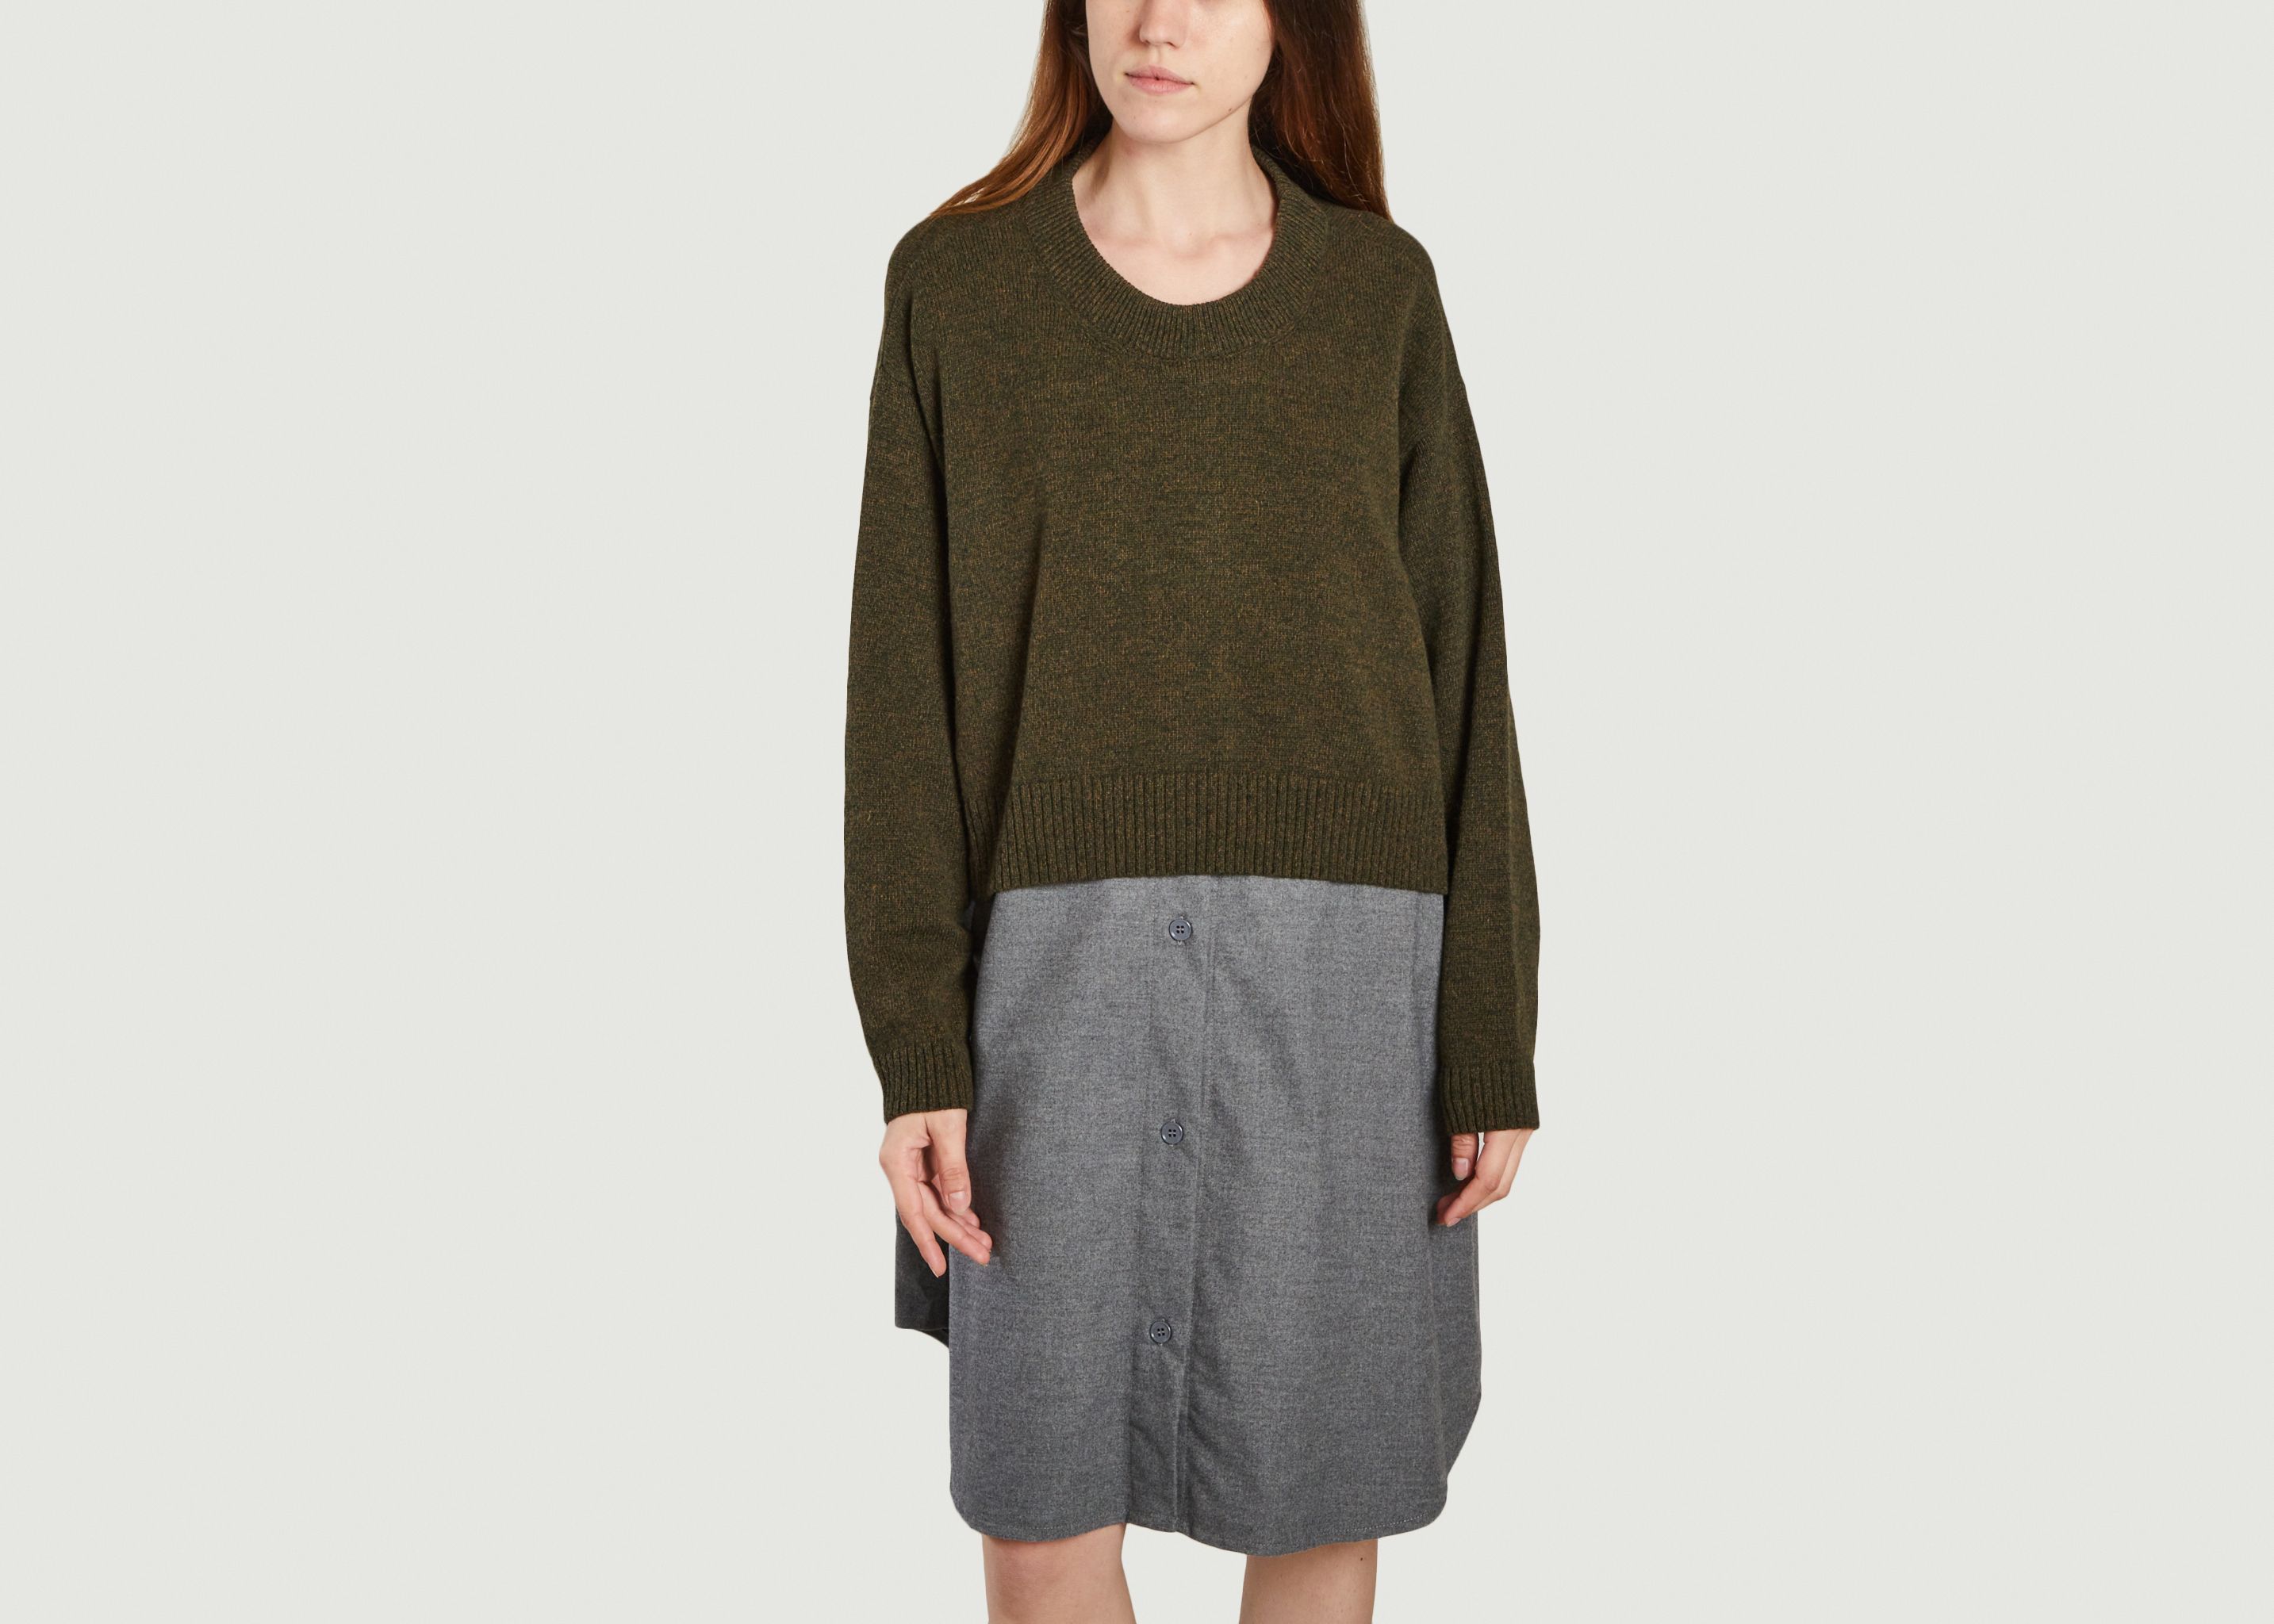 Dress and integrated sweater - MM6 Maison Margiela